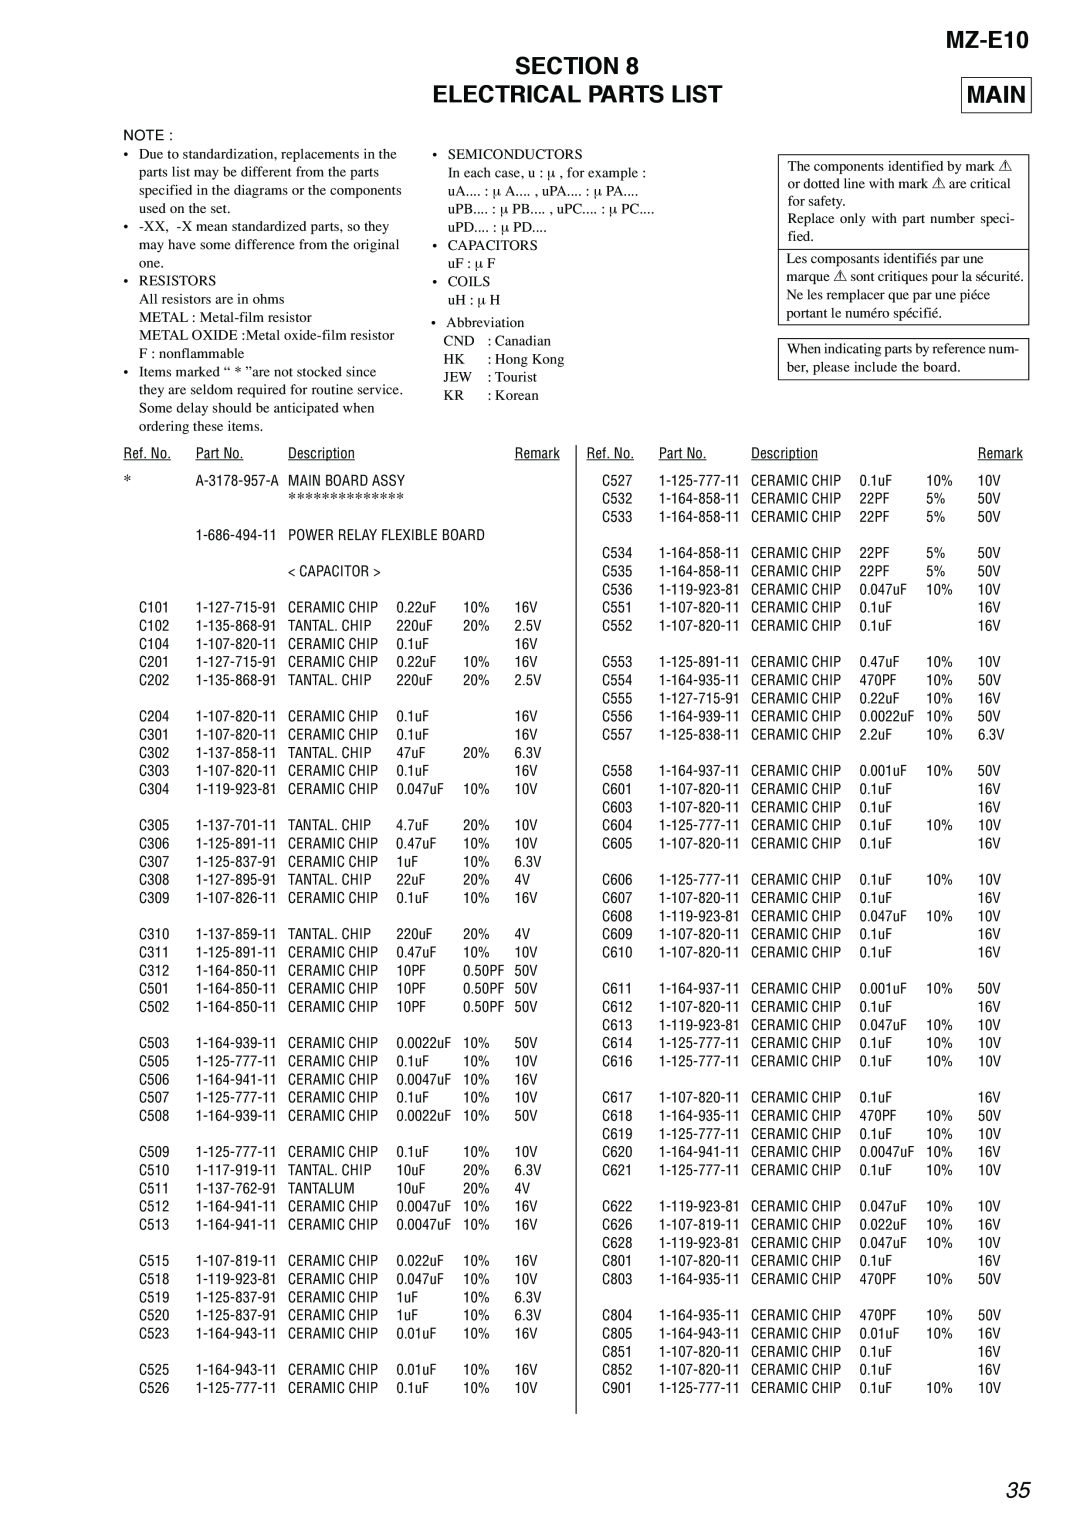 Sony service manual Section Electrical Parts List, MZ-E10 MAIN 